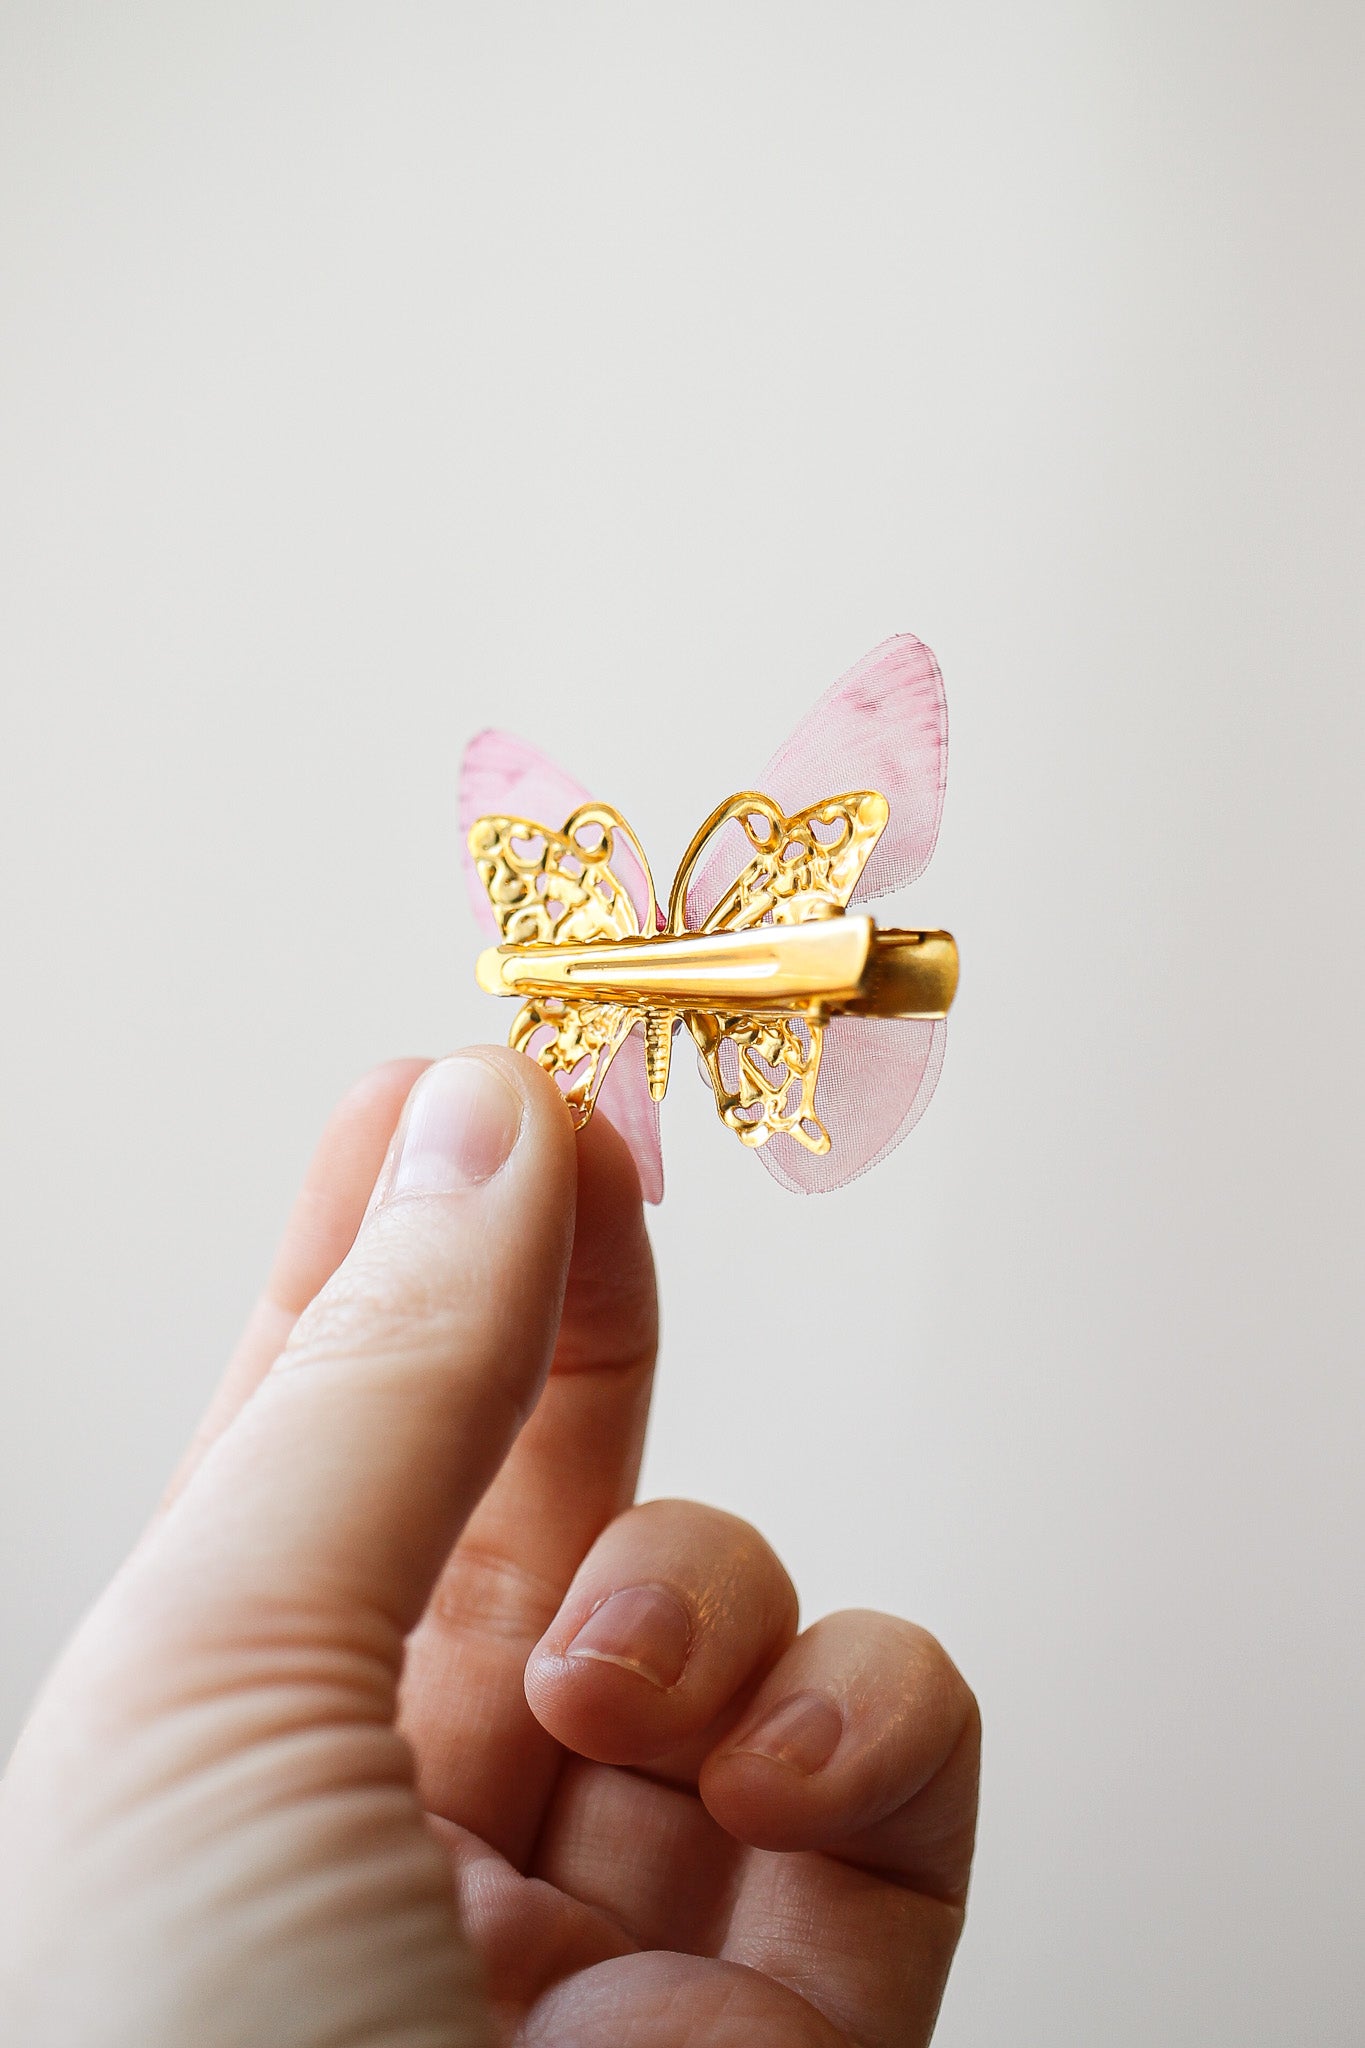 Butterfly Wings Hair Clips in Pink